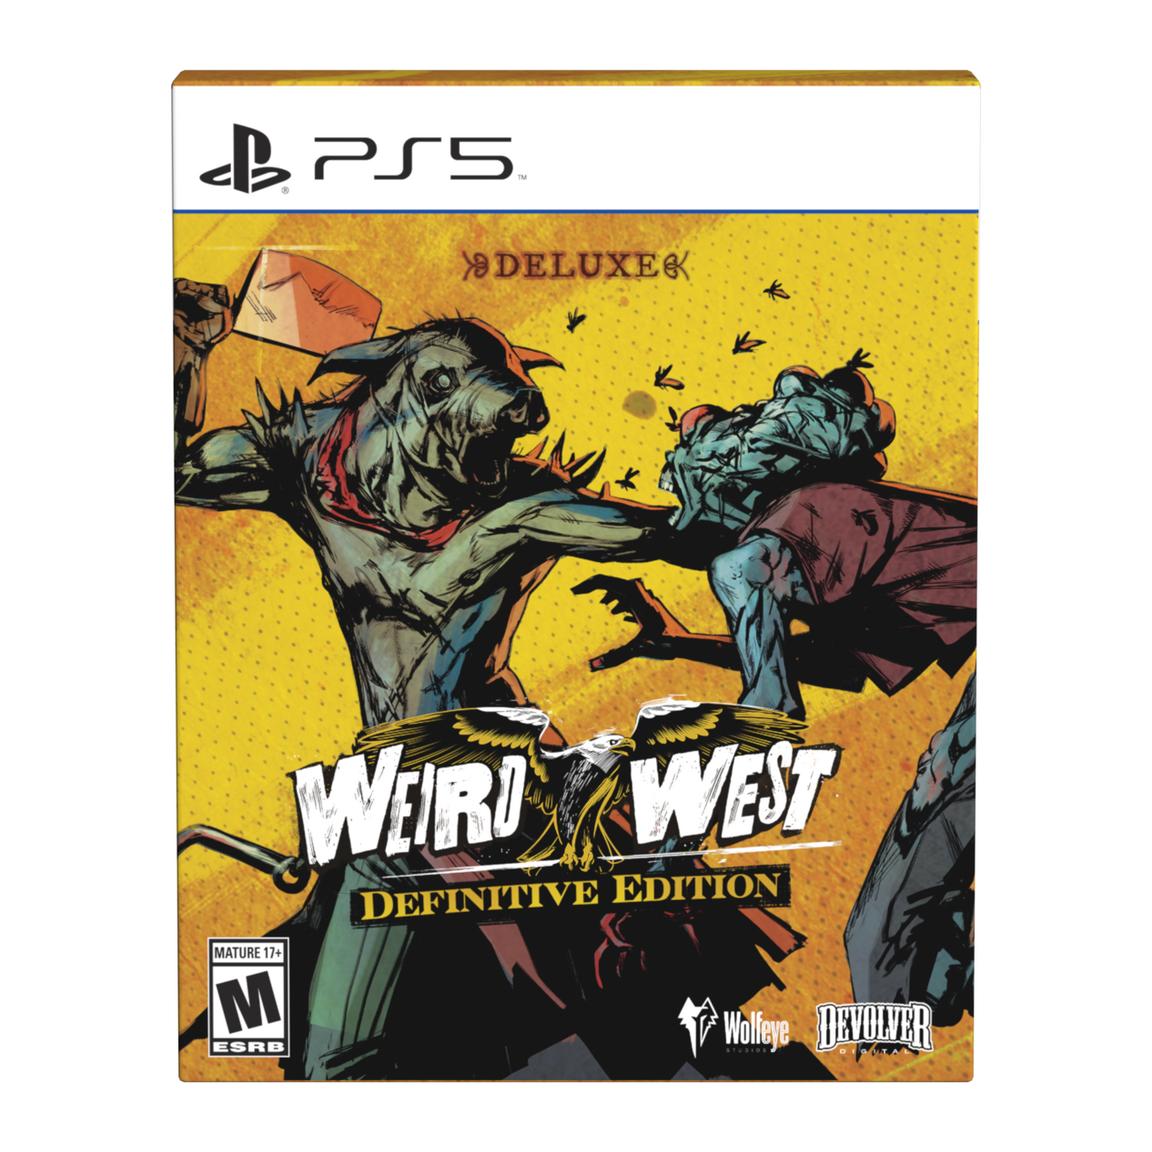 Видеоигра Weird West: Definitive Edition Deluxe - PlayStation 5